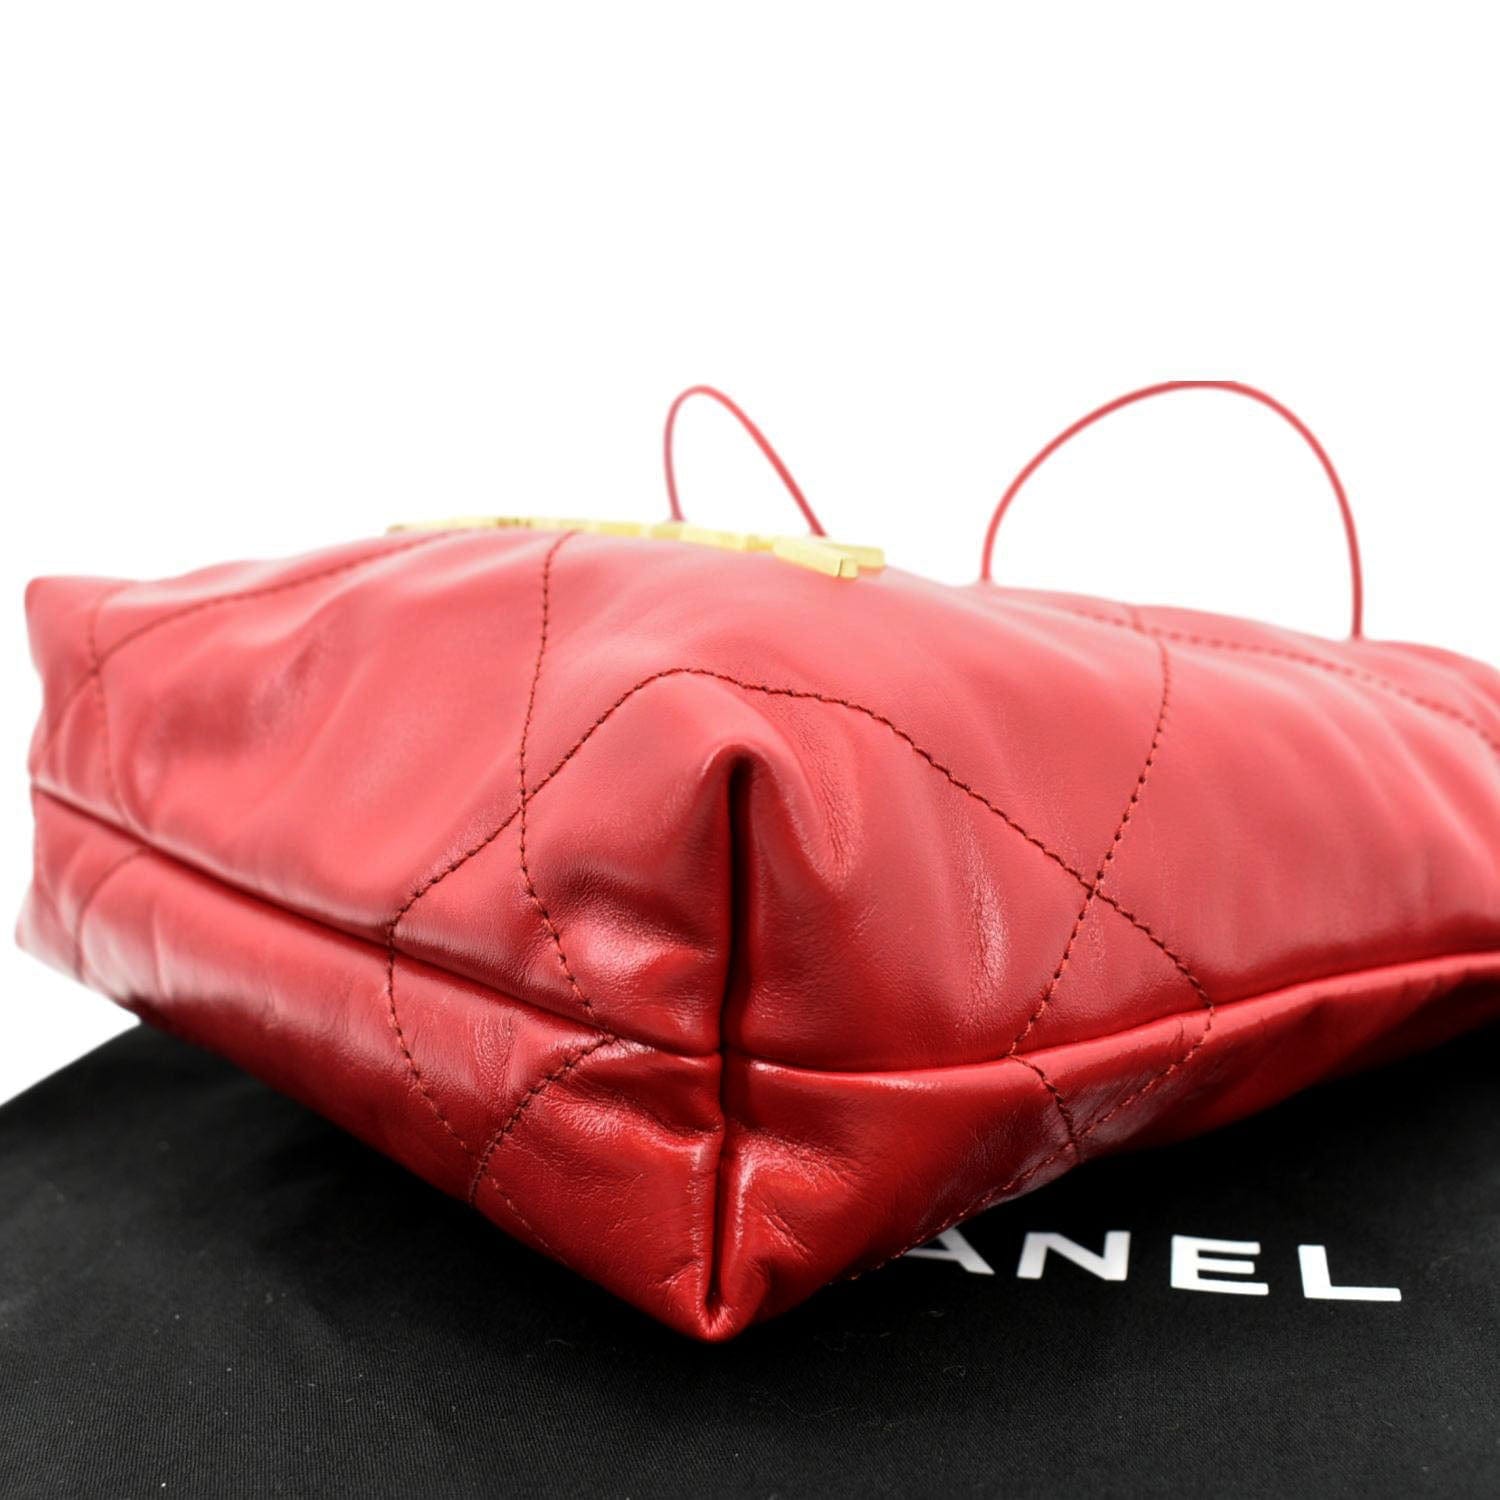 CHANEL 22 Mini Chain Shiny Calfskin Leather Shoulder Bag Red